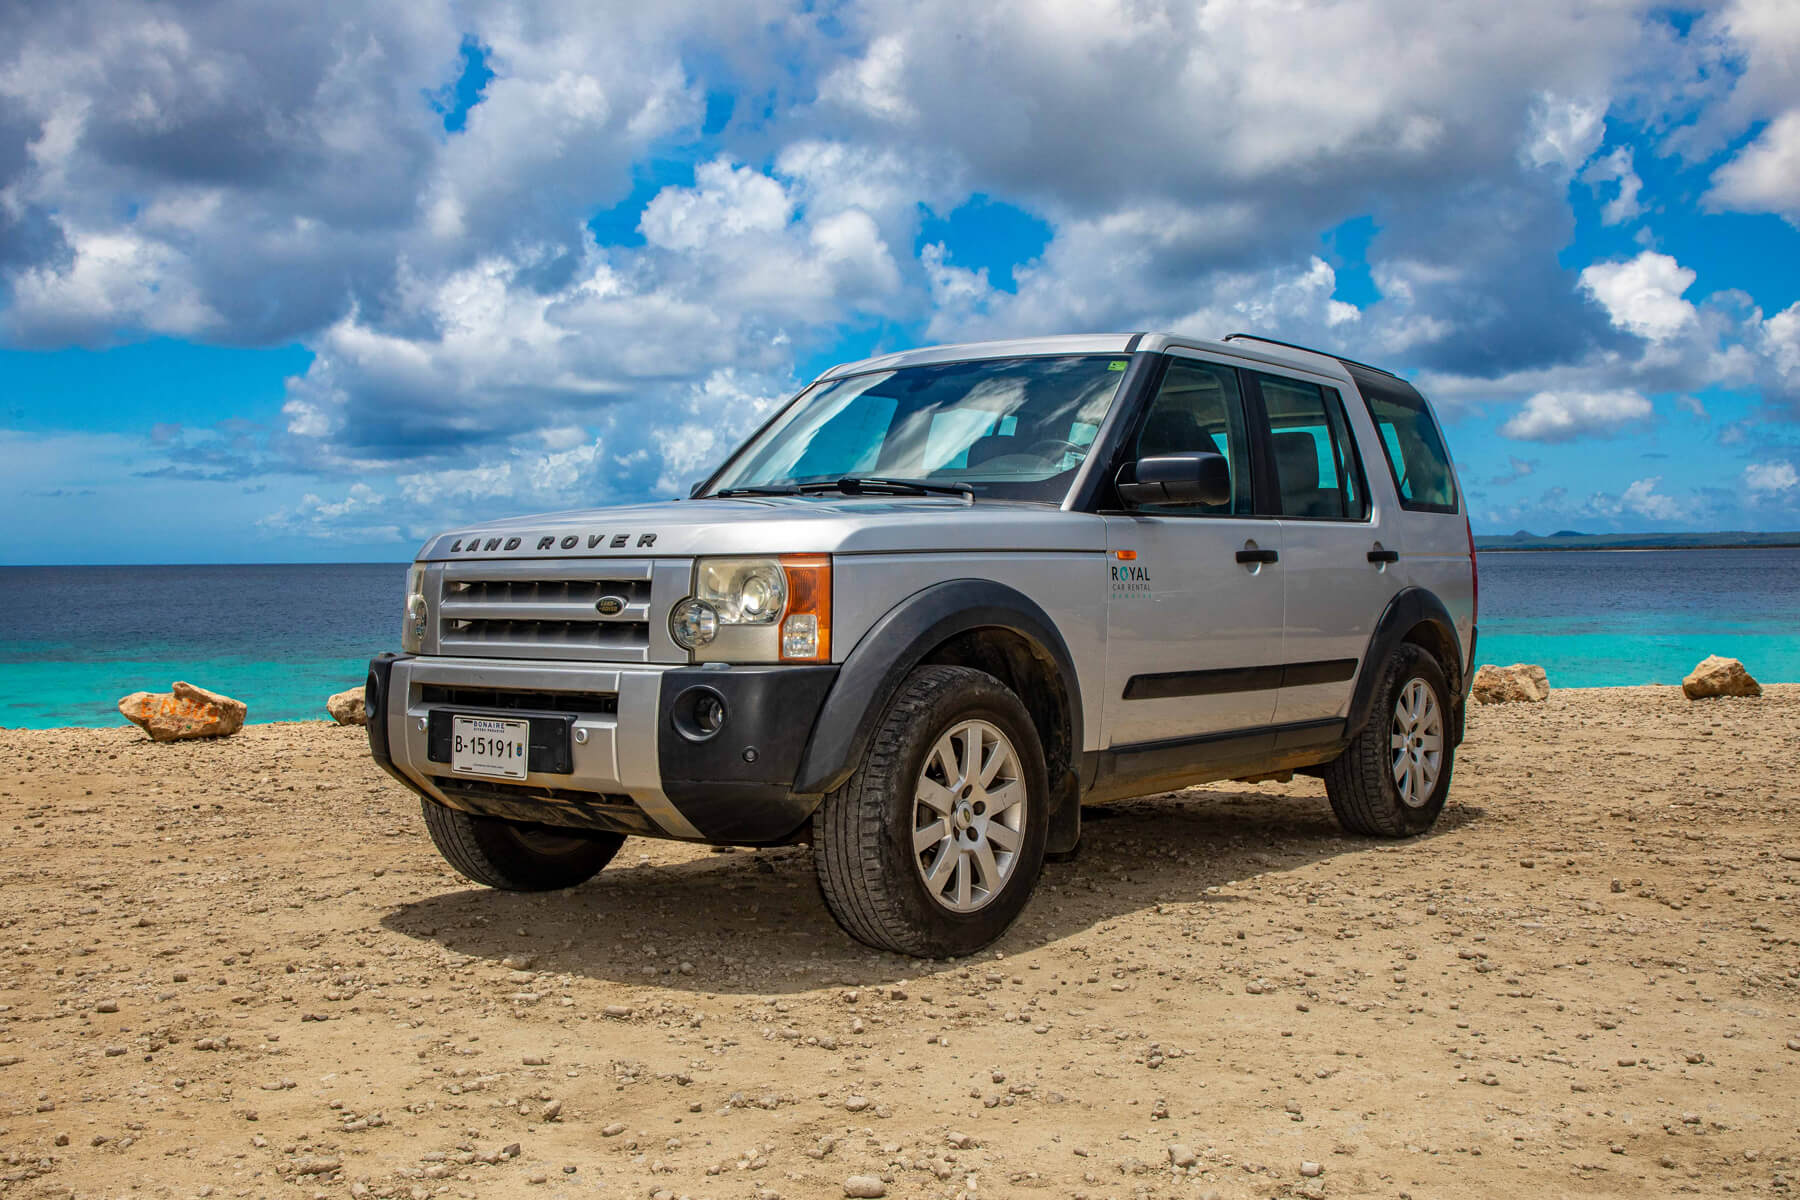 Range rover discovery